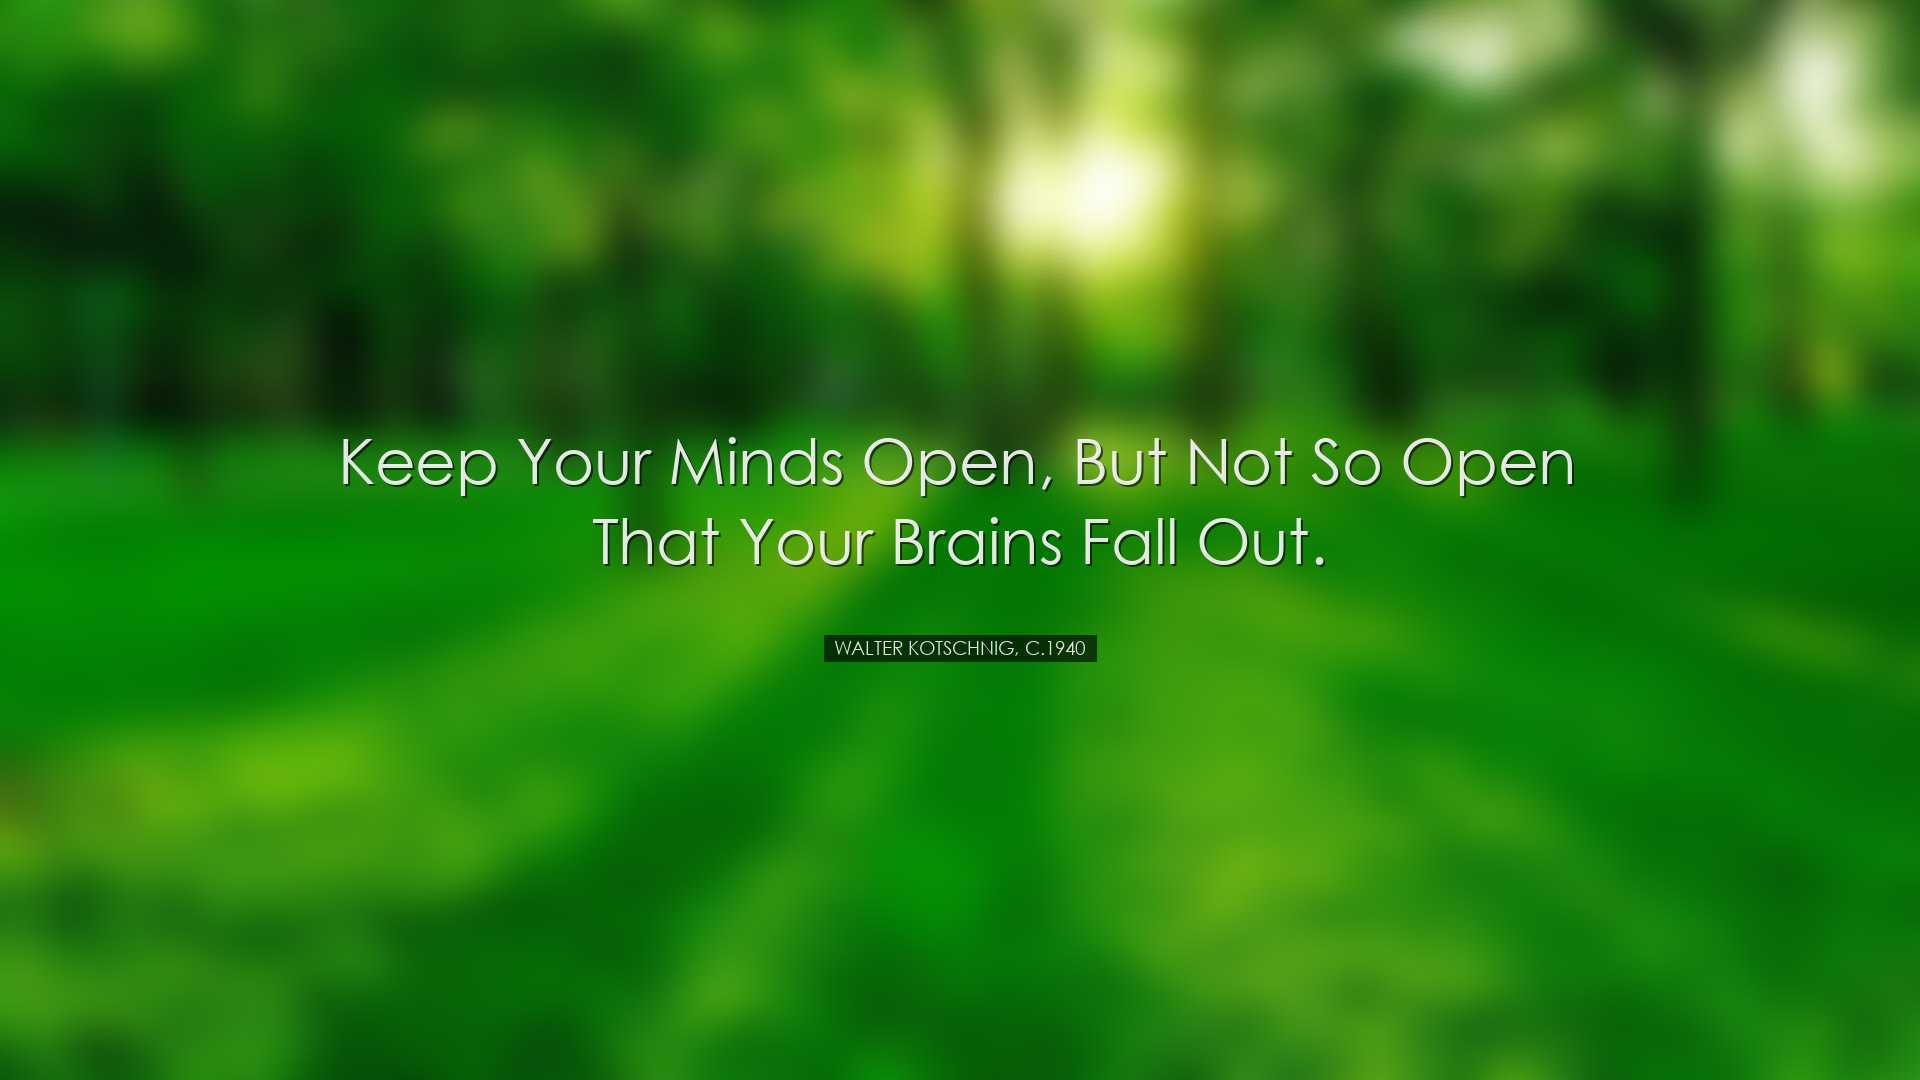 Keep your minds open, but not so open that your brains fall out. -